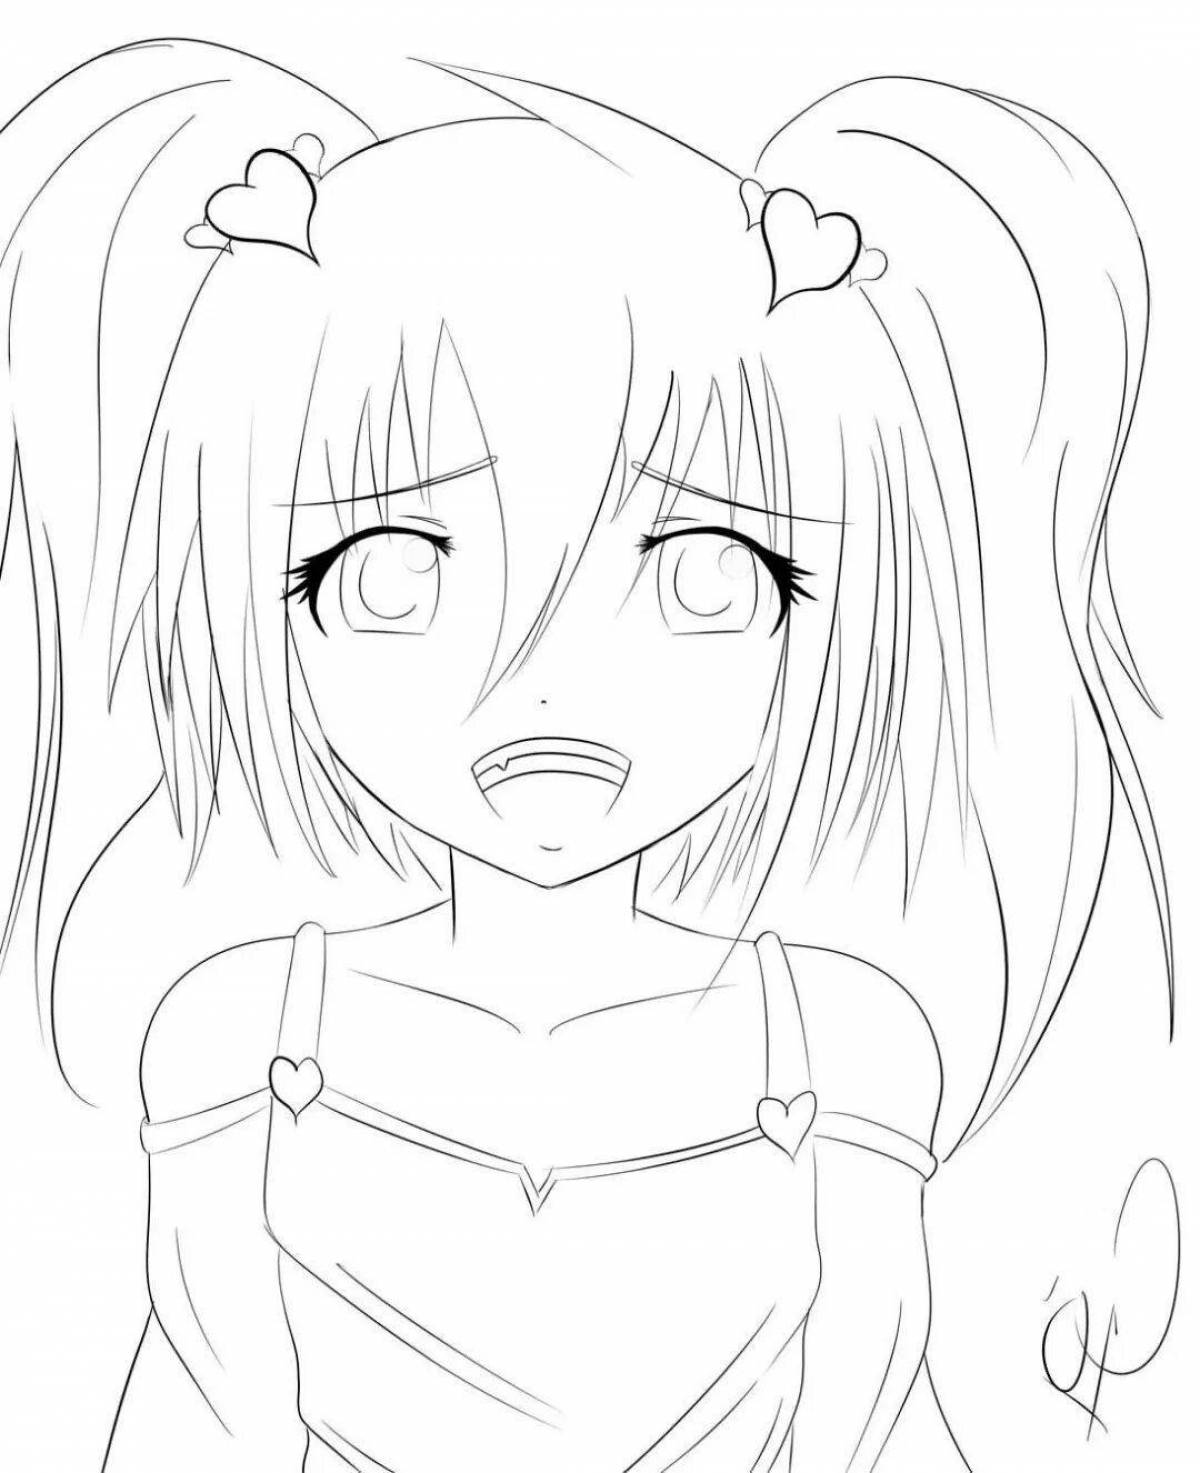 Animated Anime Sketch Coloring Page